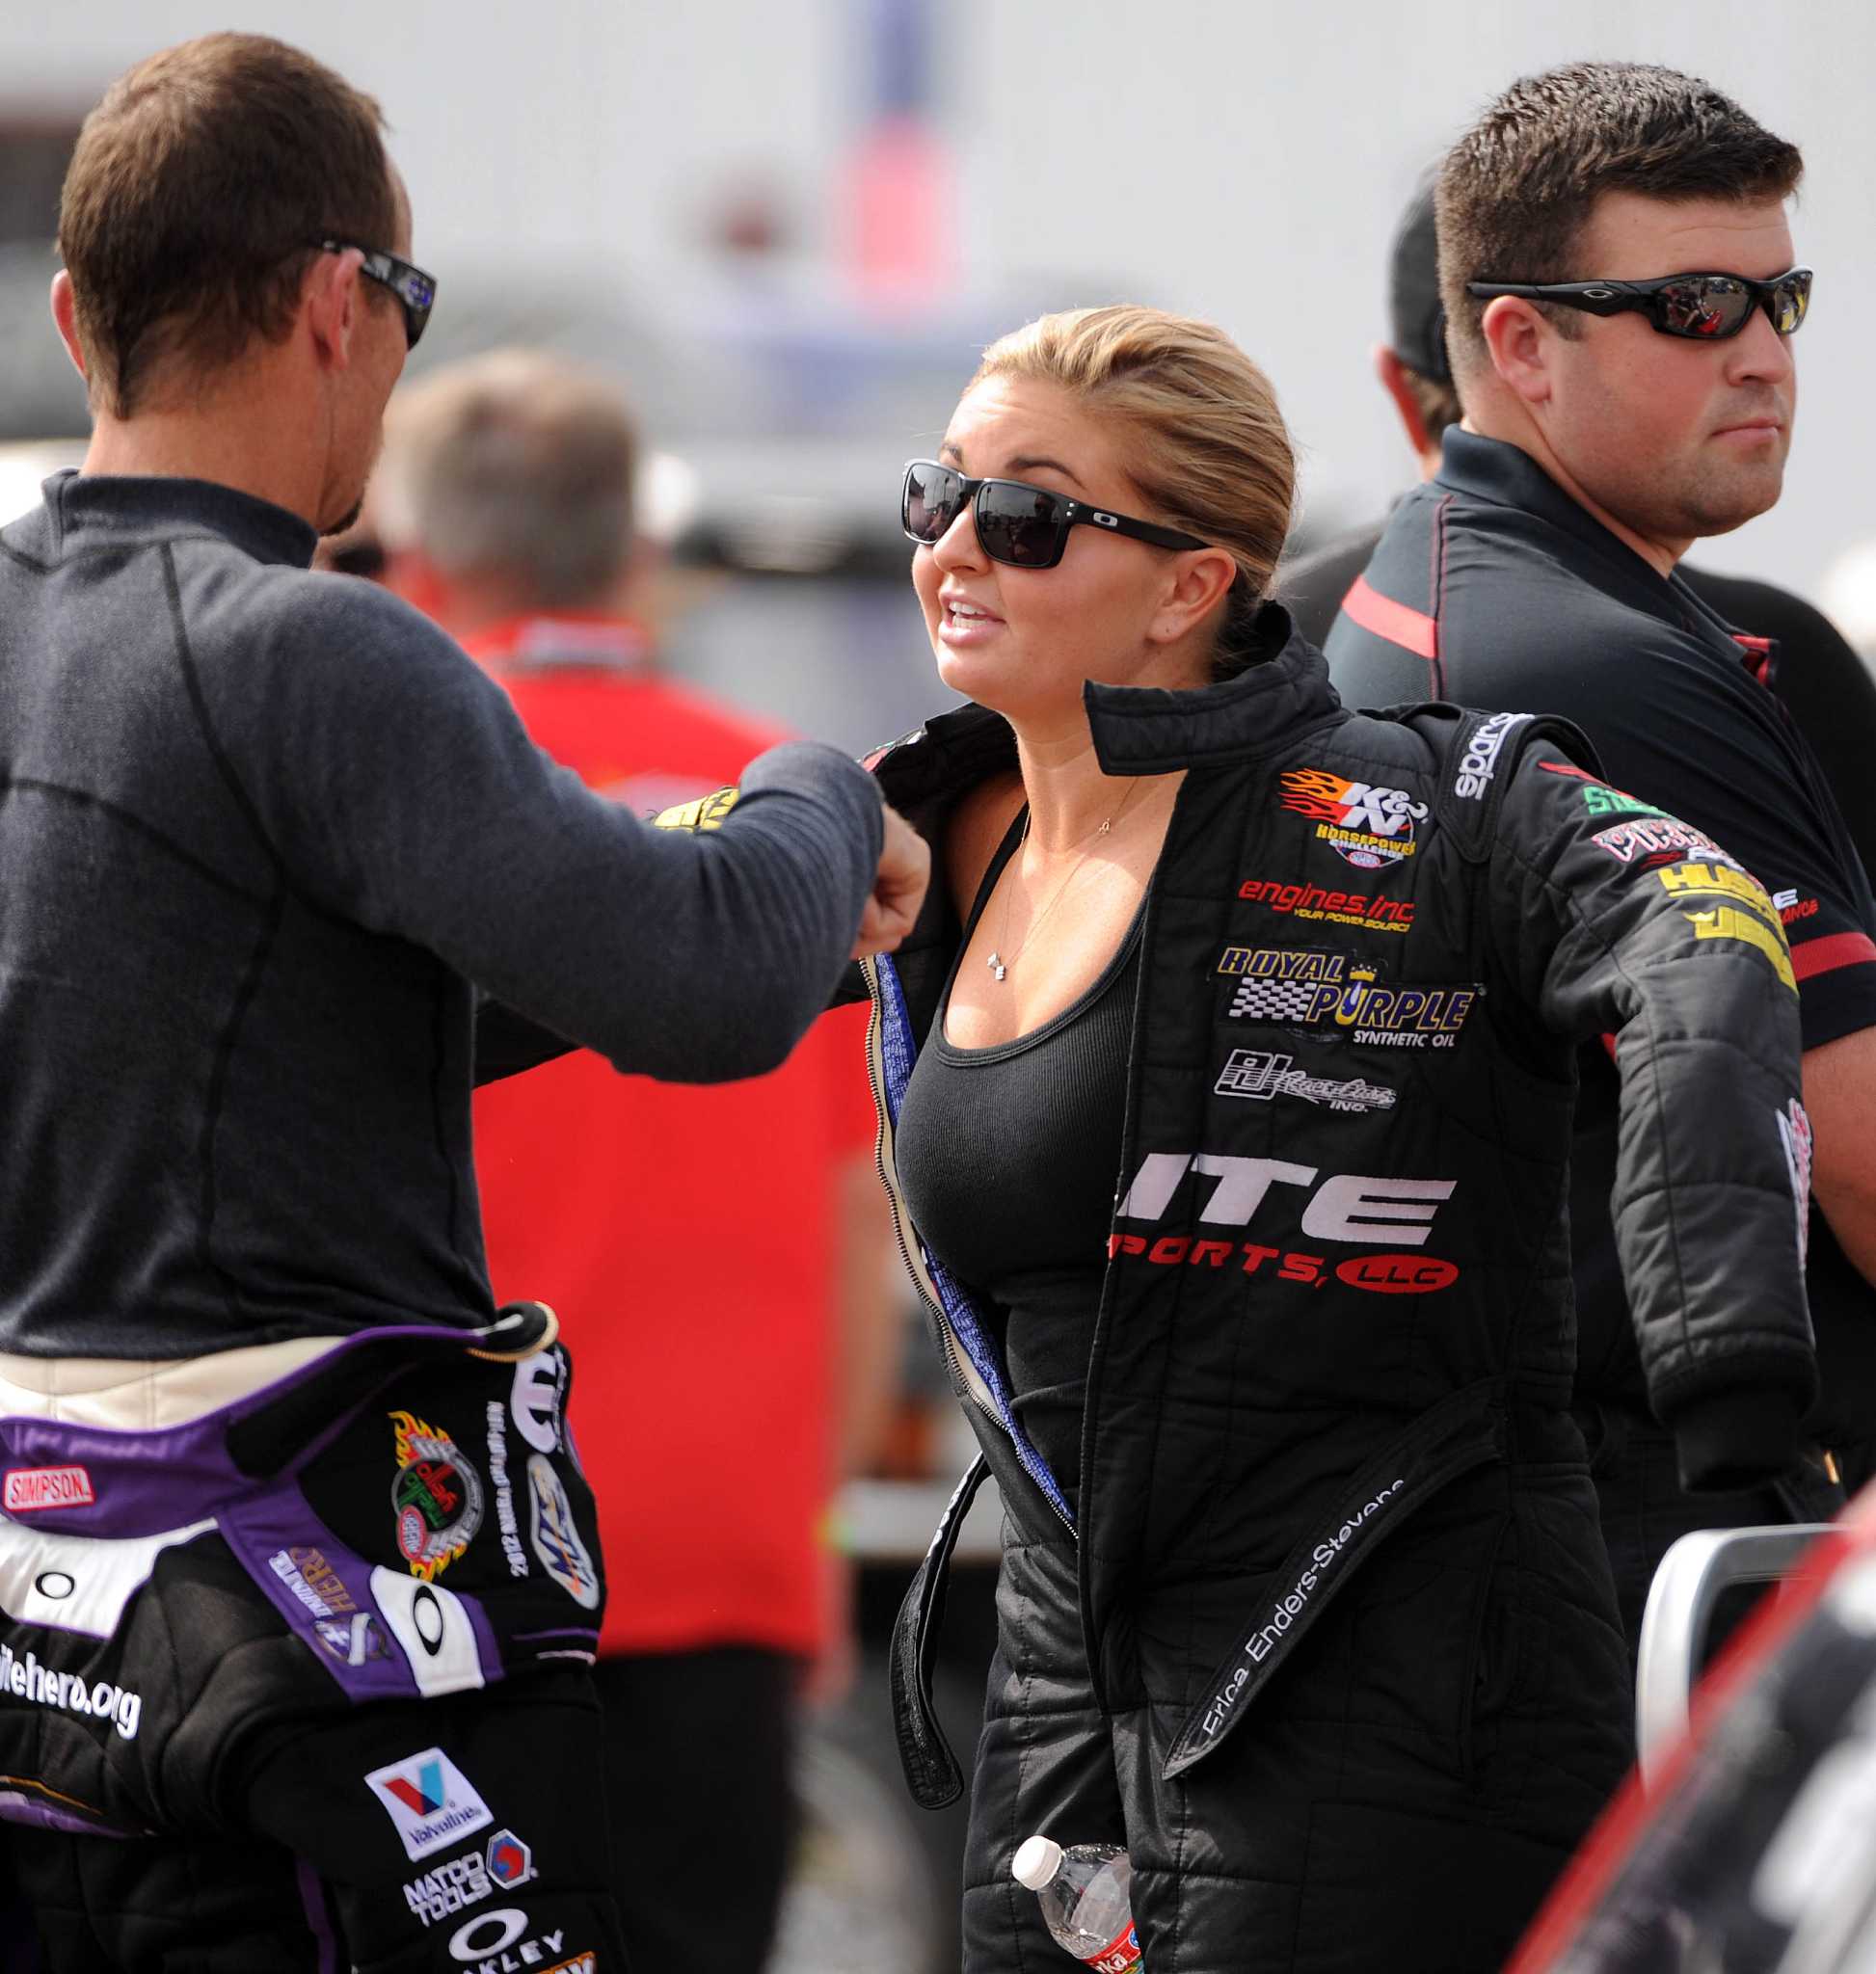 NHRA report: Women racers have shown they can compete - Houston Chronicle